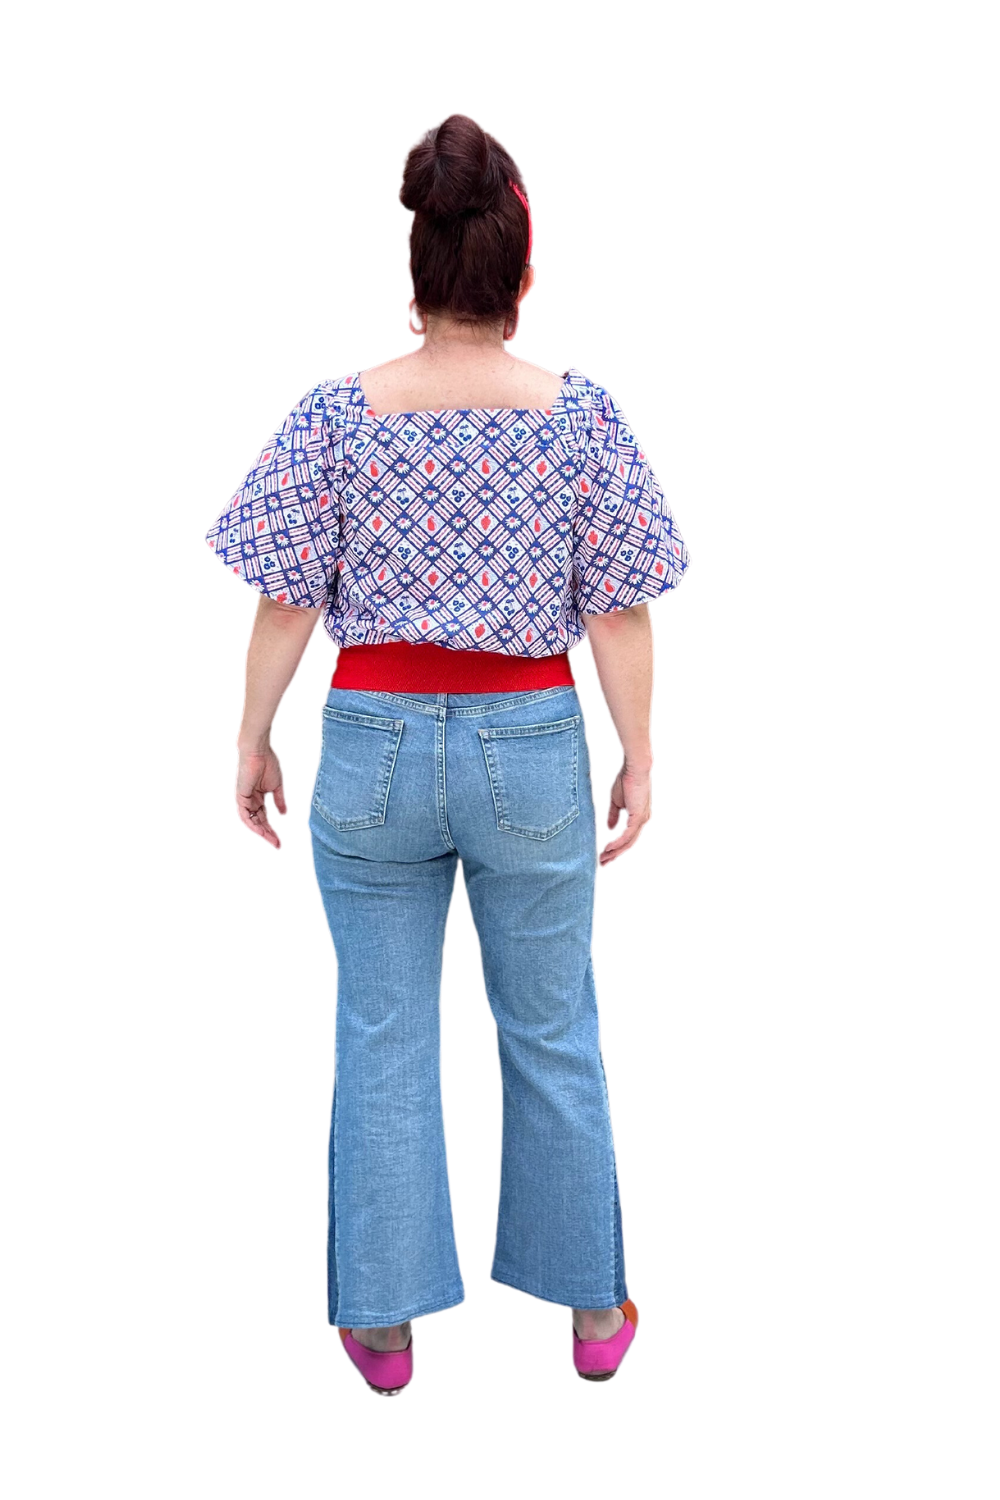 Back of square neck peasant top with blue and red print and graphic of fruit and flowers